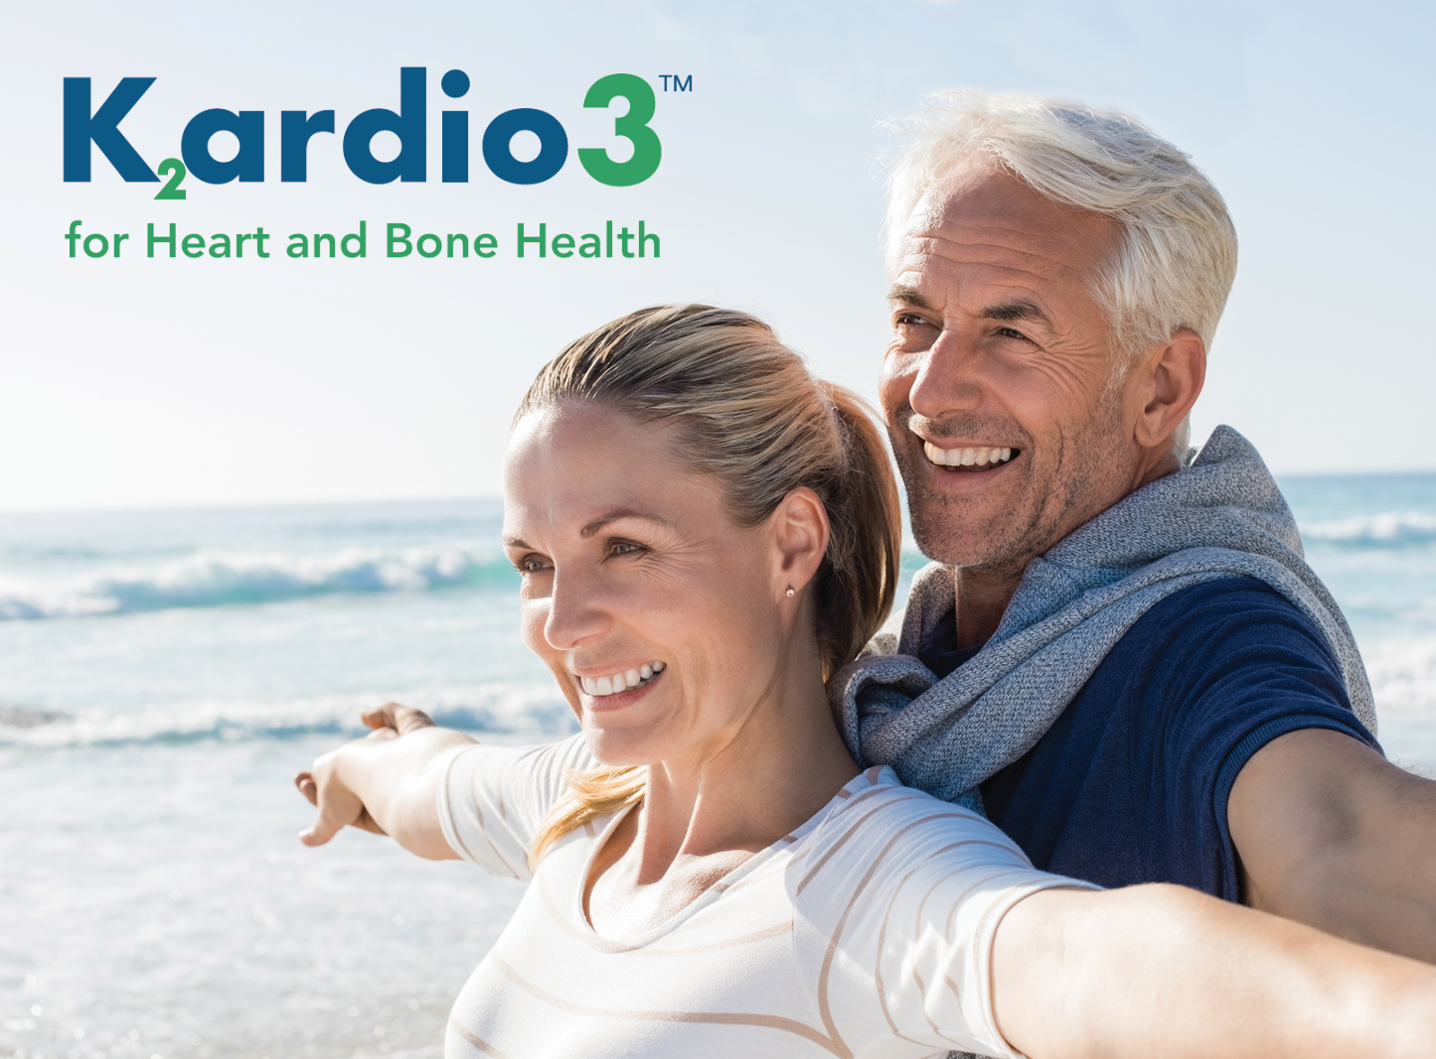 Kardio3 blend with Omega-3, Vitamin K2 and Phytosterols